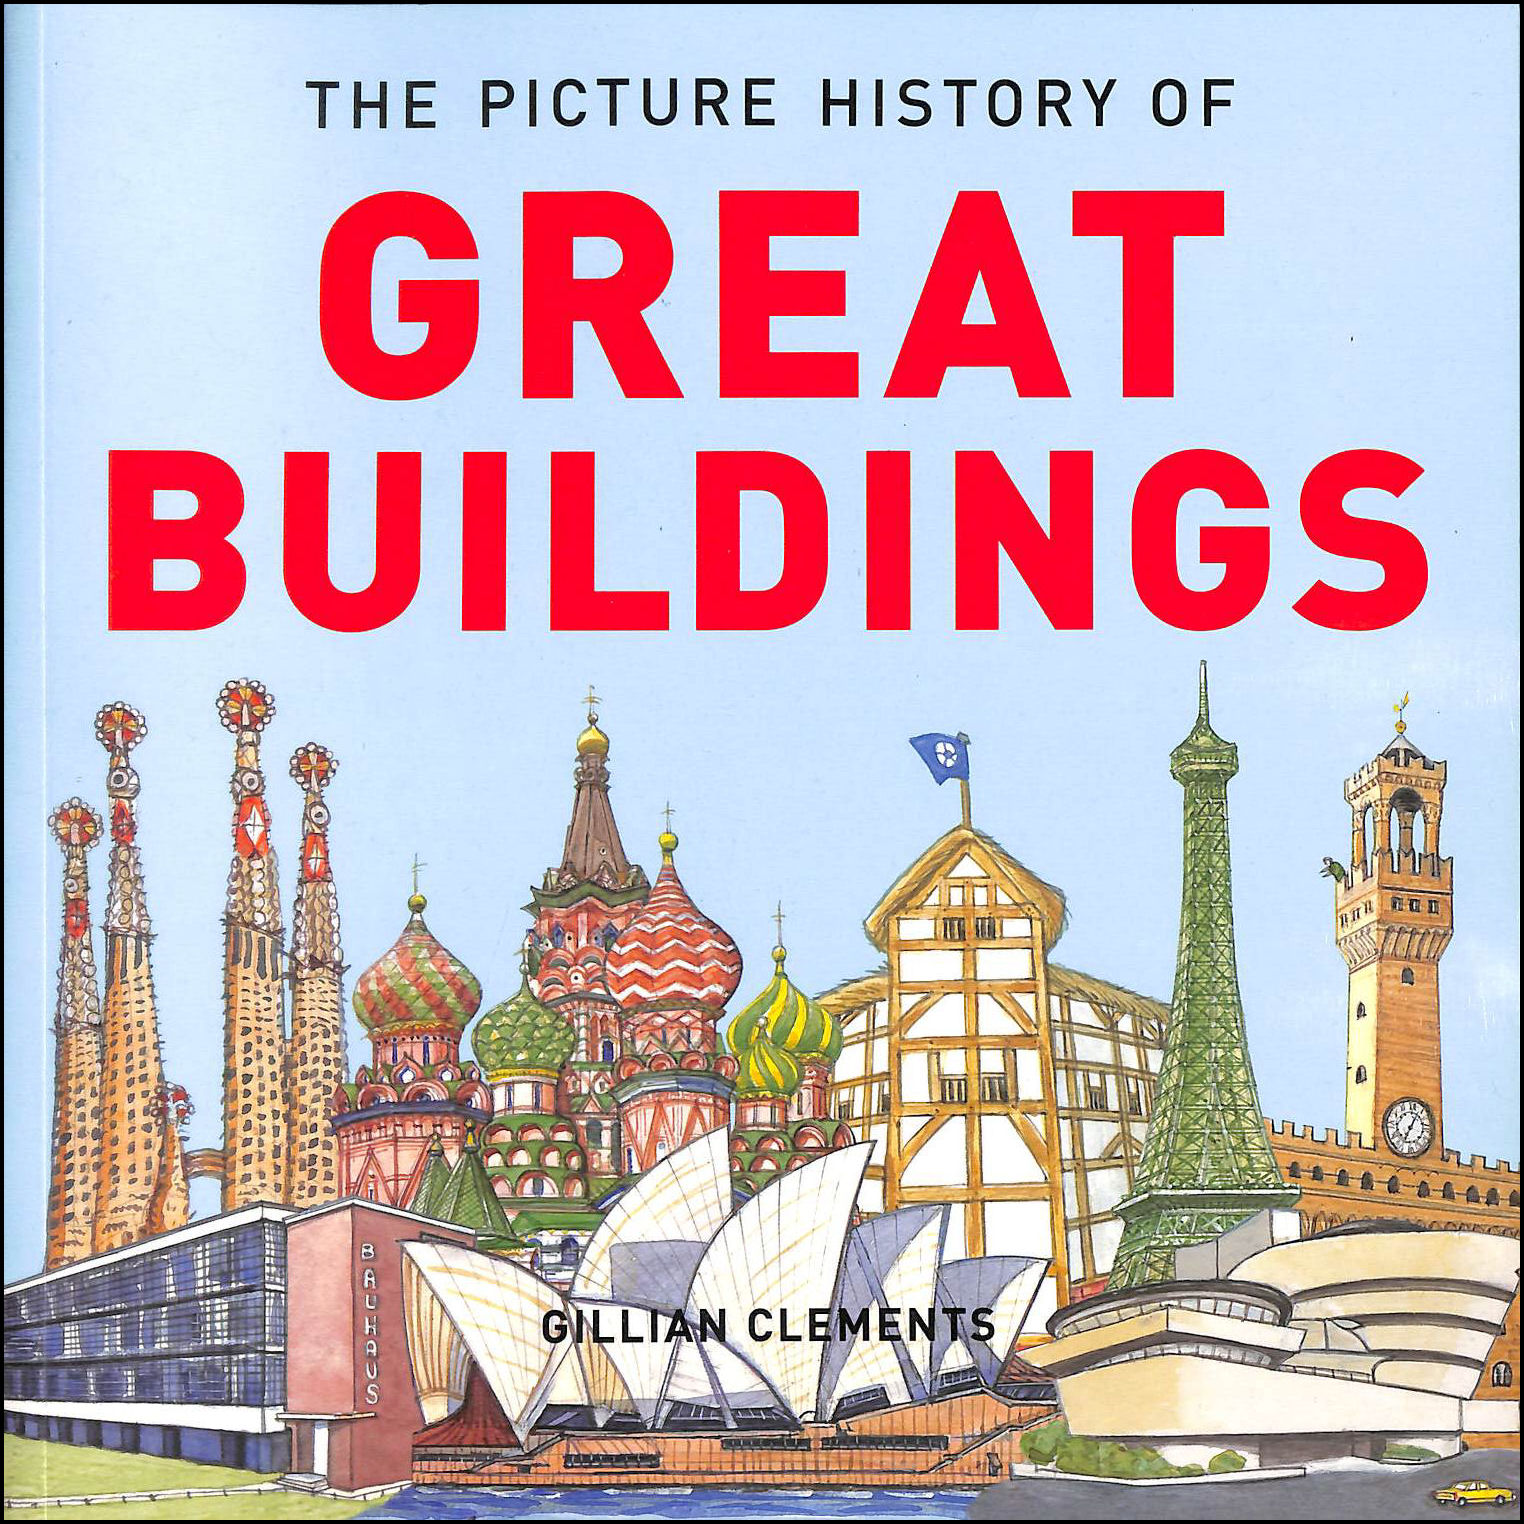 CLEMENTS, GILLIAN - The Picture History of Great Buildings